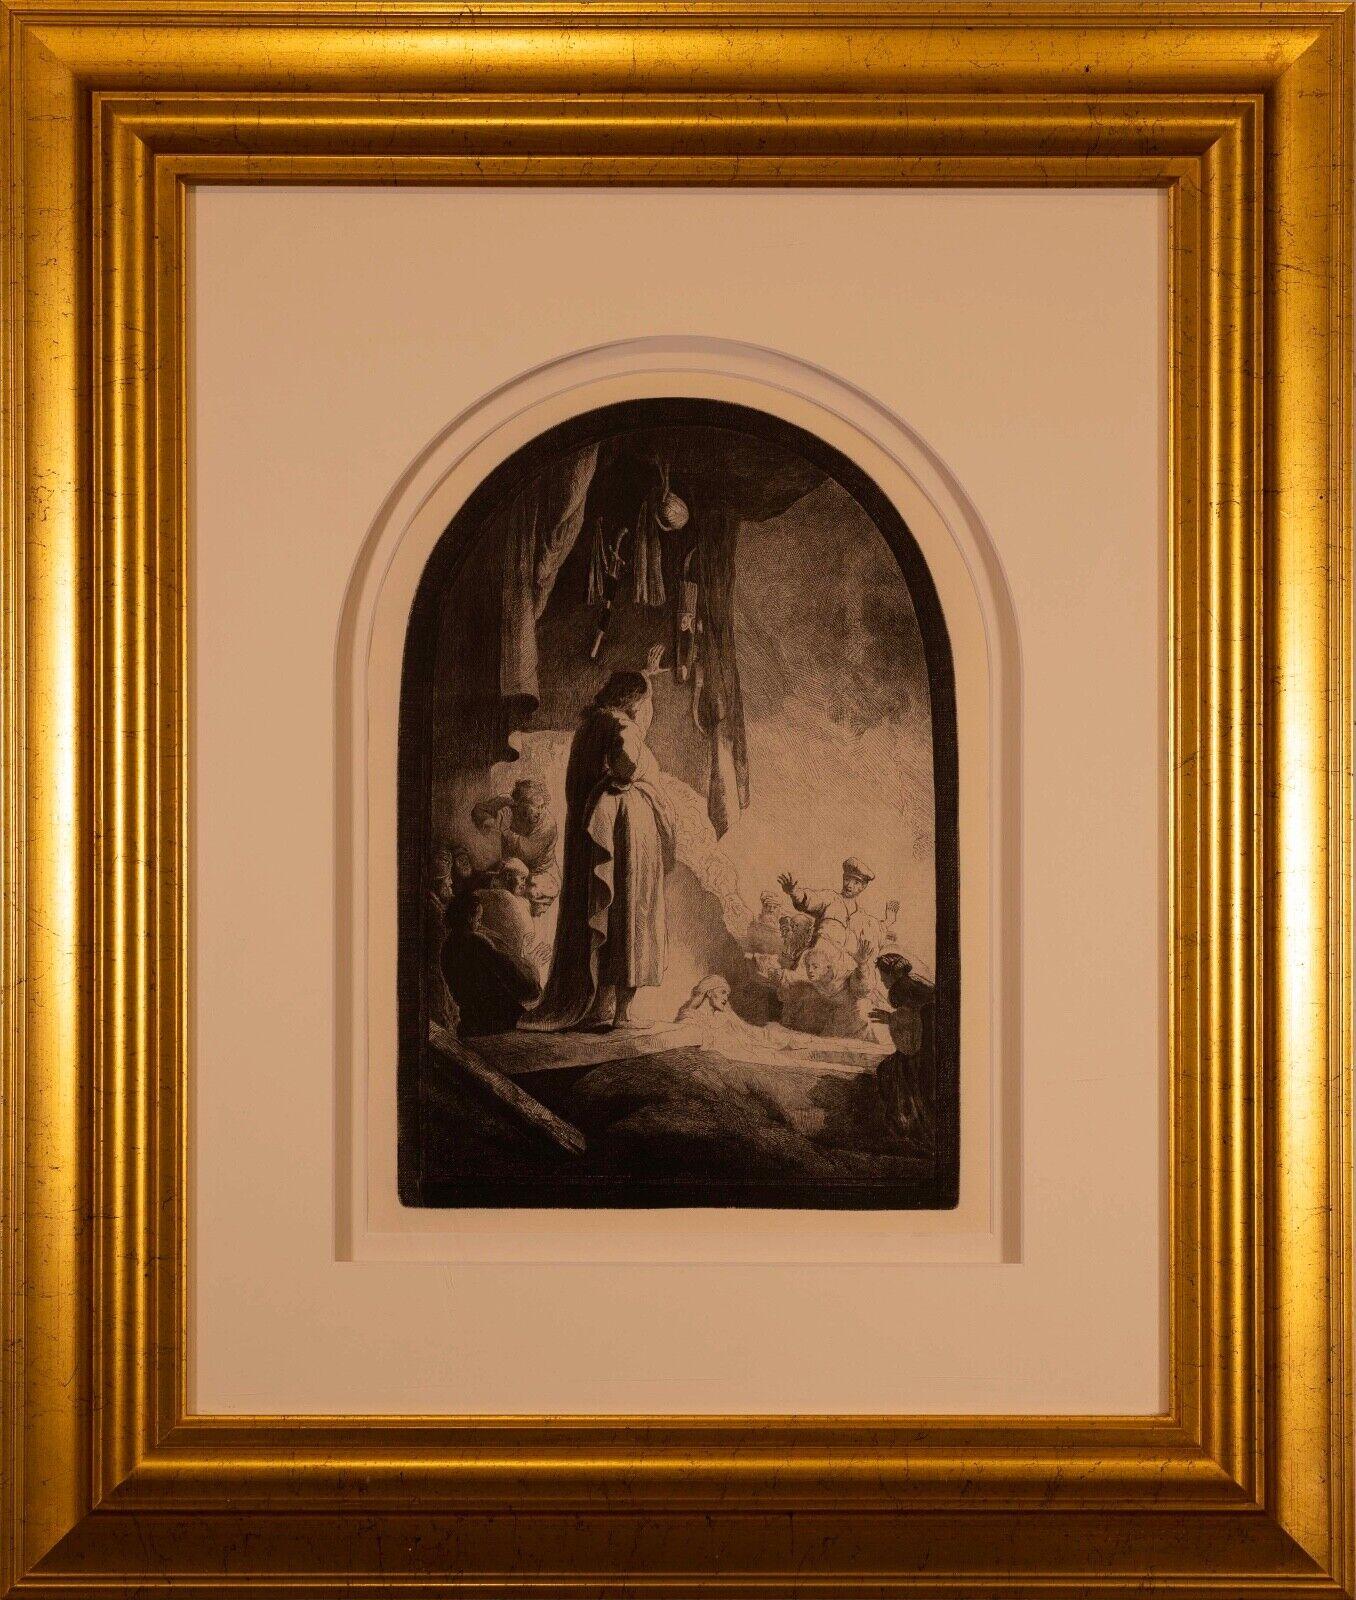 
A spiritual etching on Ingres d’Arches off-white laid paper paper titled “The Raising of Lazarus” by Rembrandt Van Rijn. Created circa 1630. A 20th/21st Century impression printed by Marjorie Van Dyke. From the “Millenium” edition limited to 2500